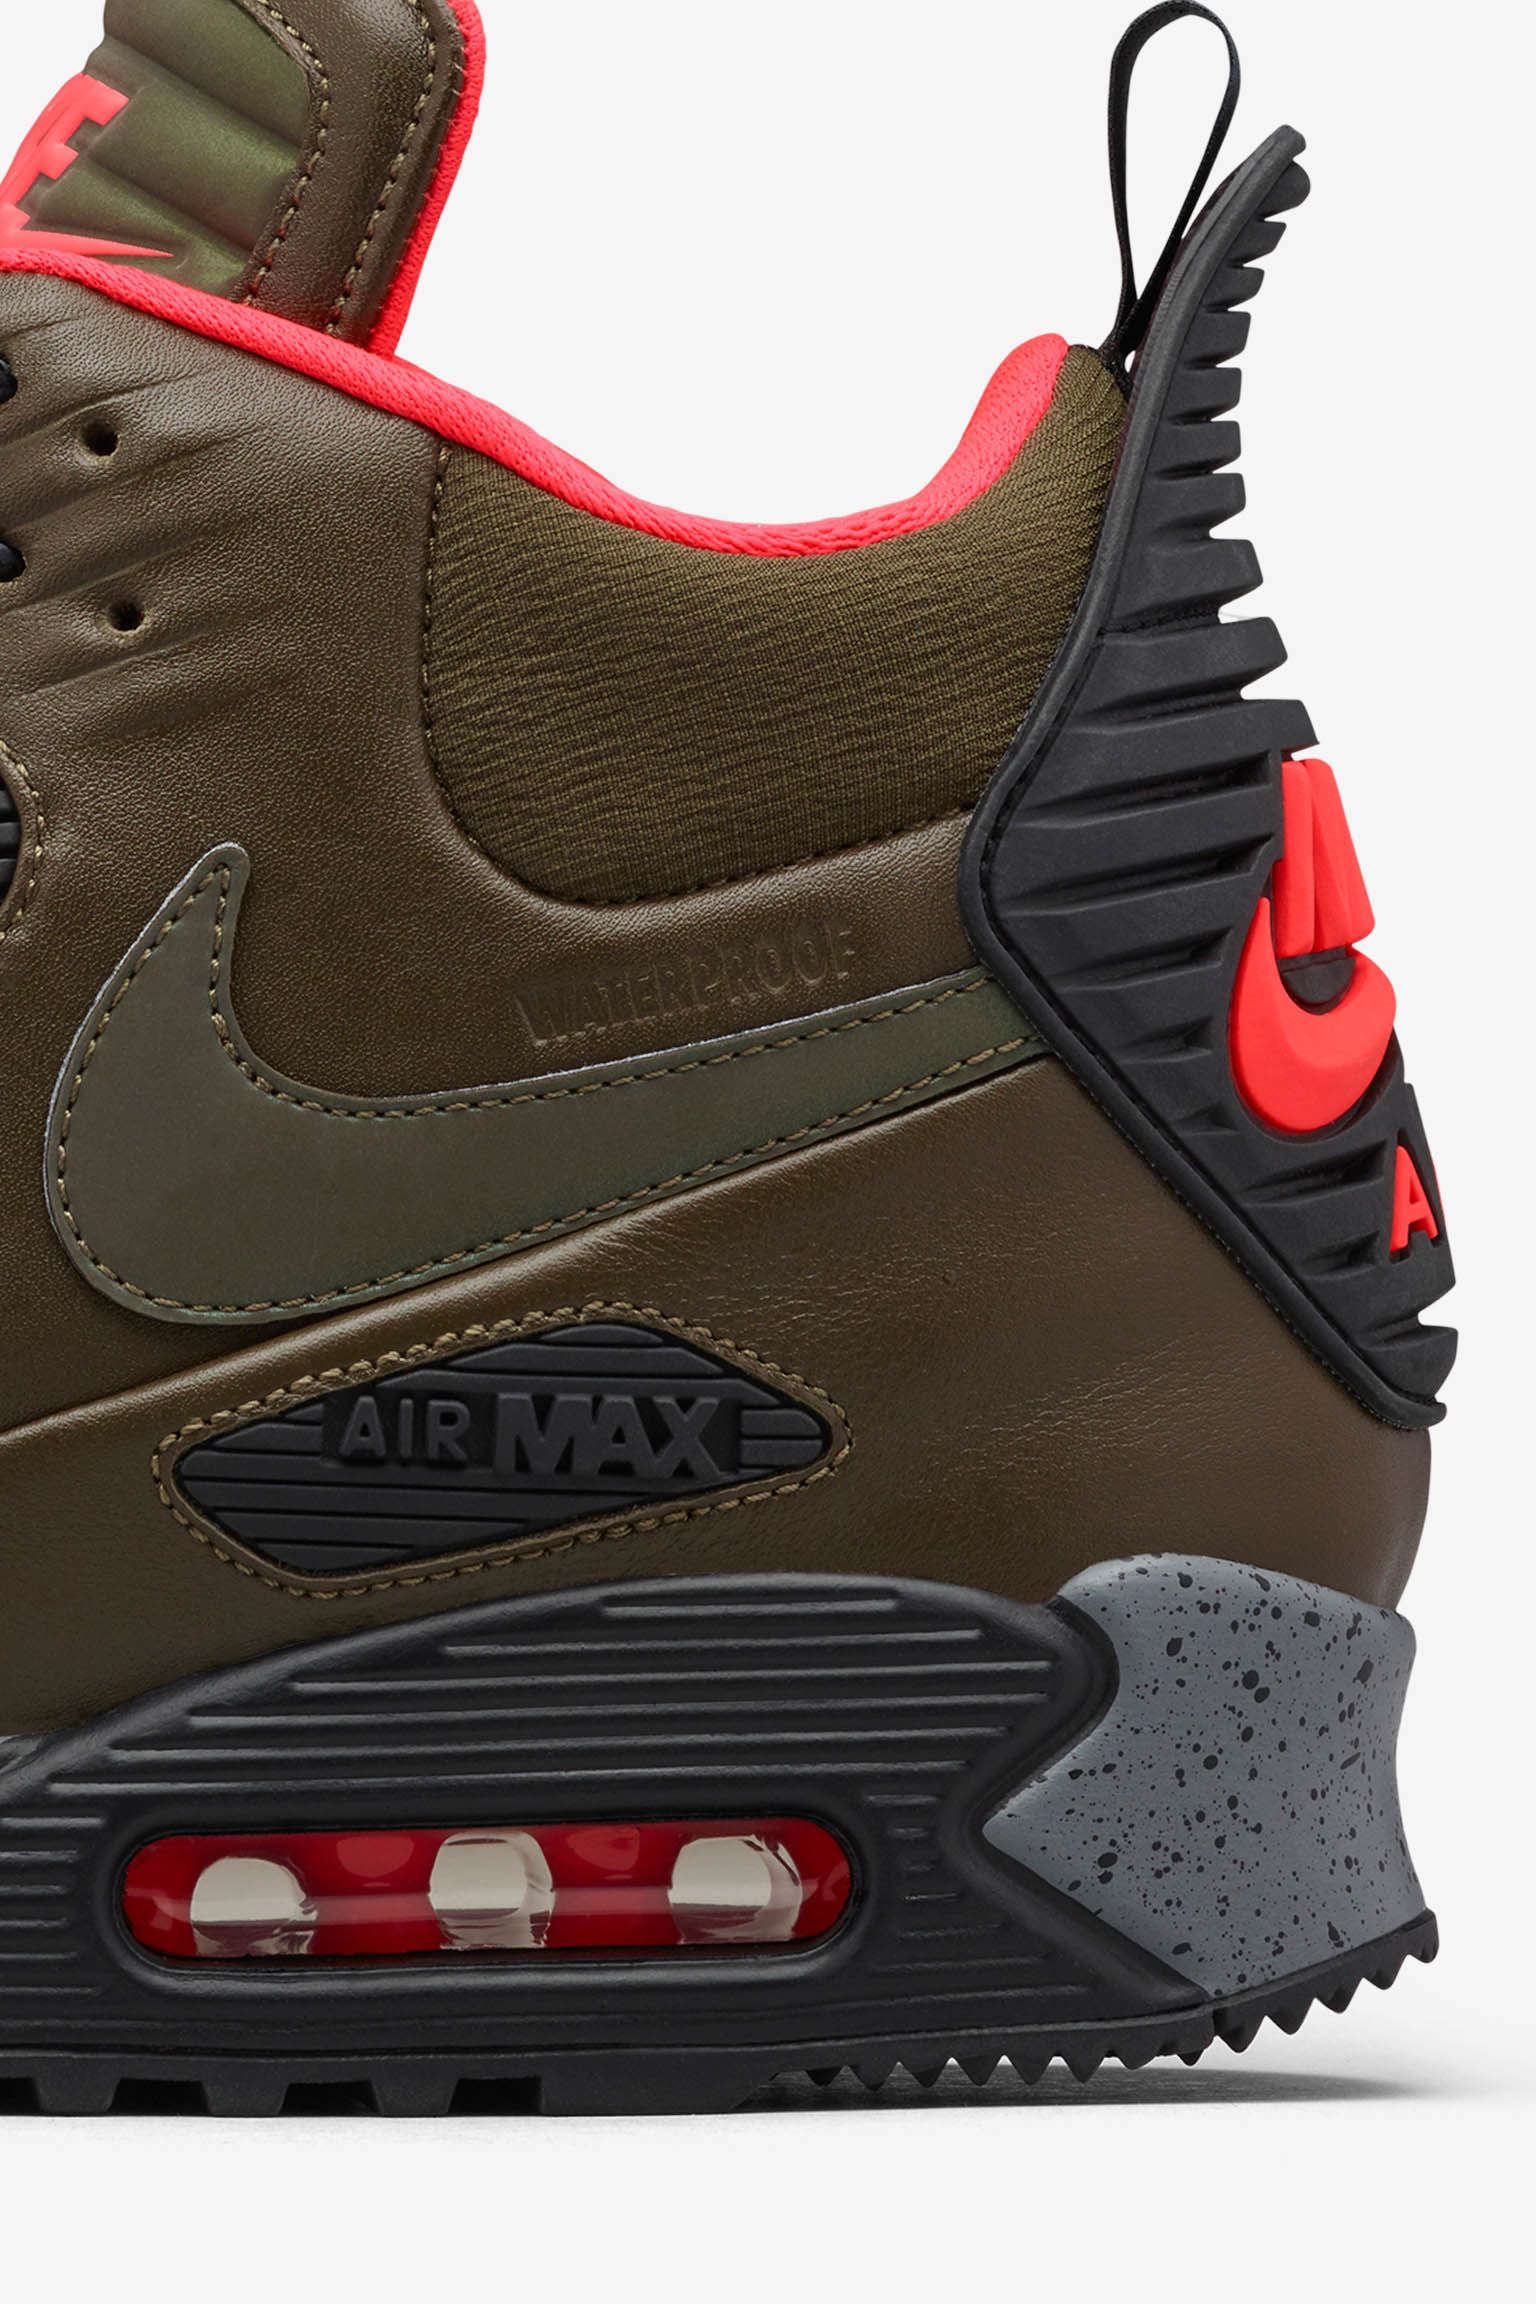 nike air max 90 winter sneaker boots